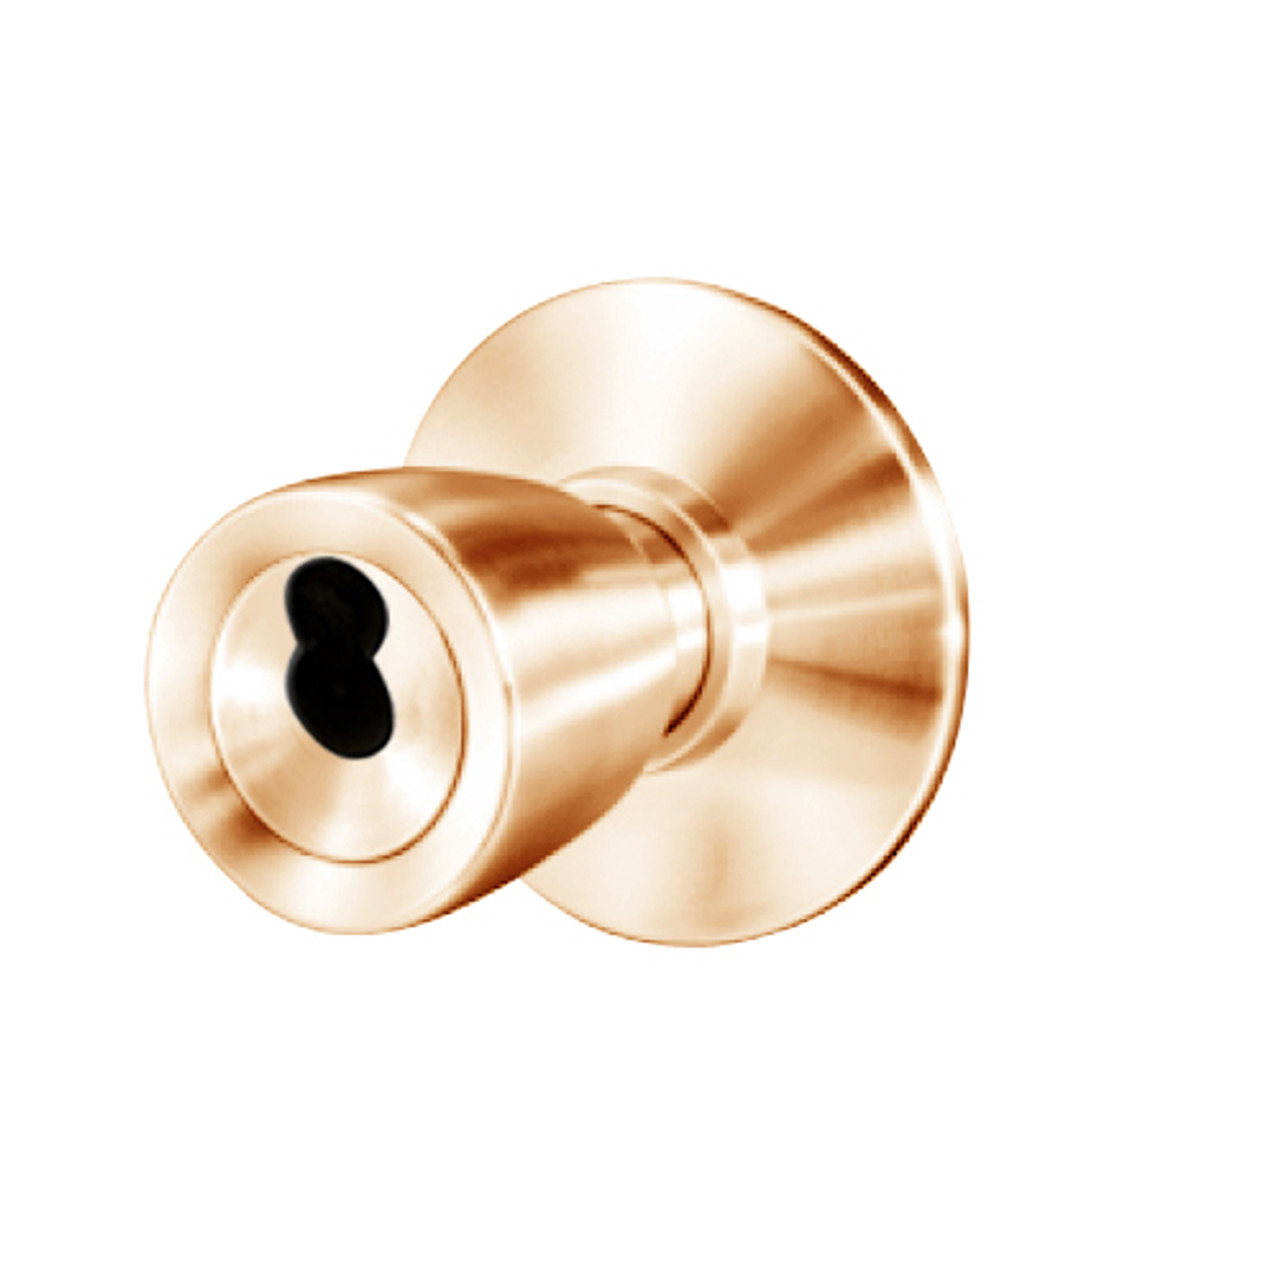 8K47YD6DS3612 Best 8K Series Exit Heavy Duty Cylindrical Knob Locks with Tulip Style in Satin Bronze